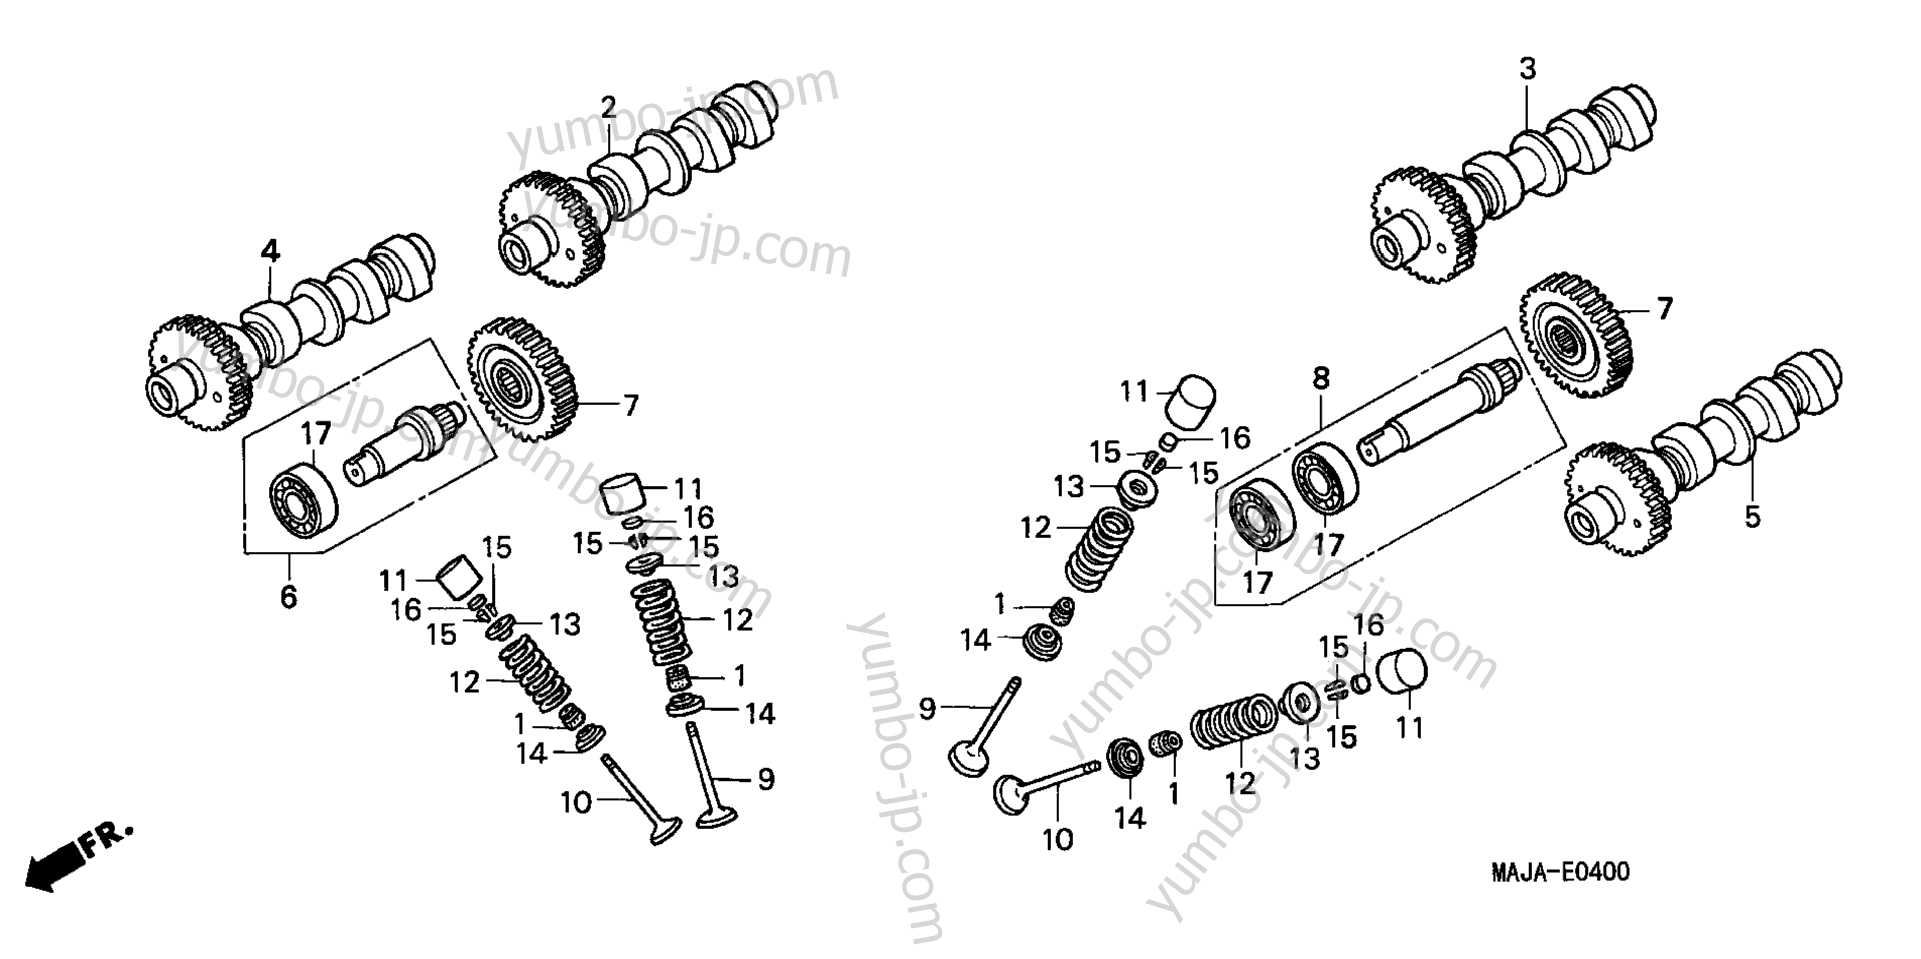 CAMSHAFT / VALVE for motorcycles HONDA ST1100A A 2000 year